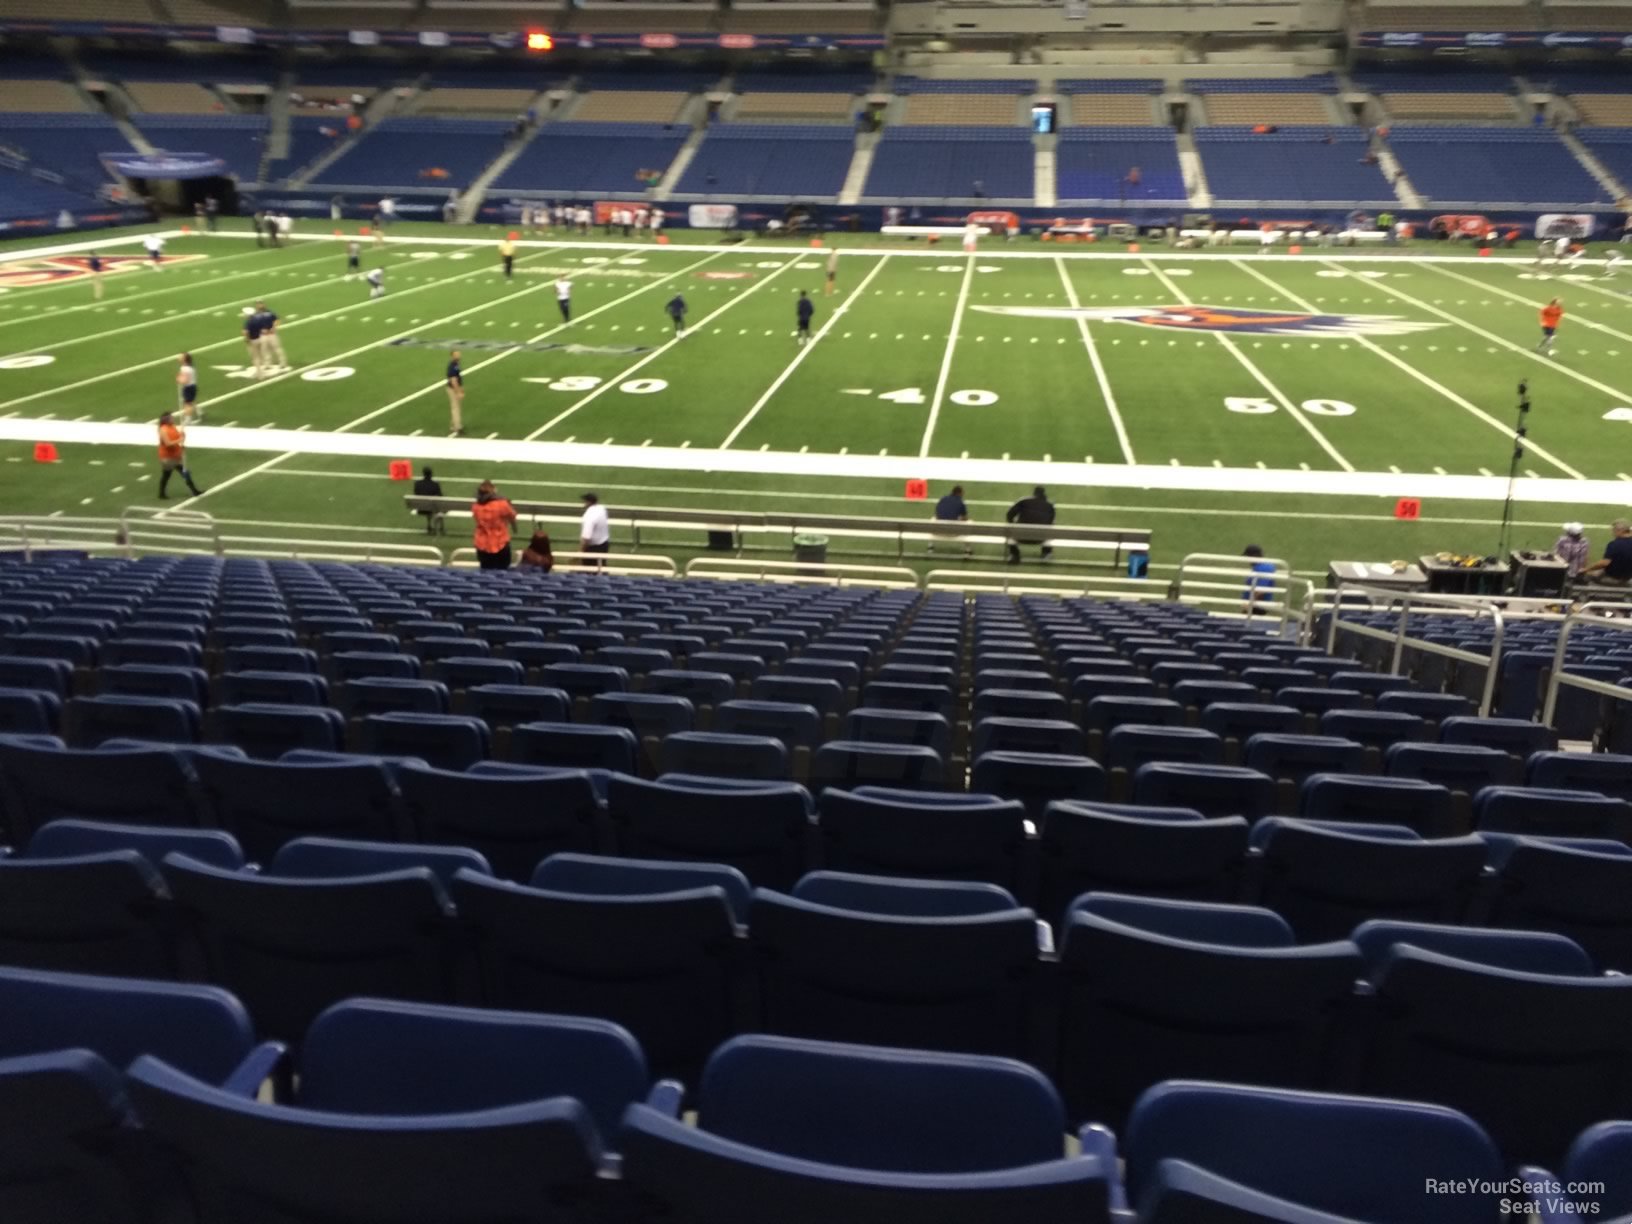 section 135, row 18 seat view  for football - alamodome